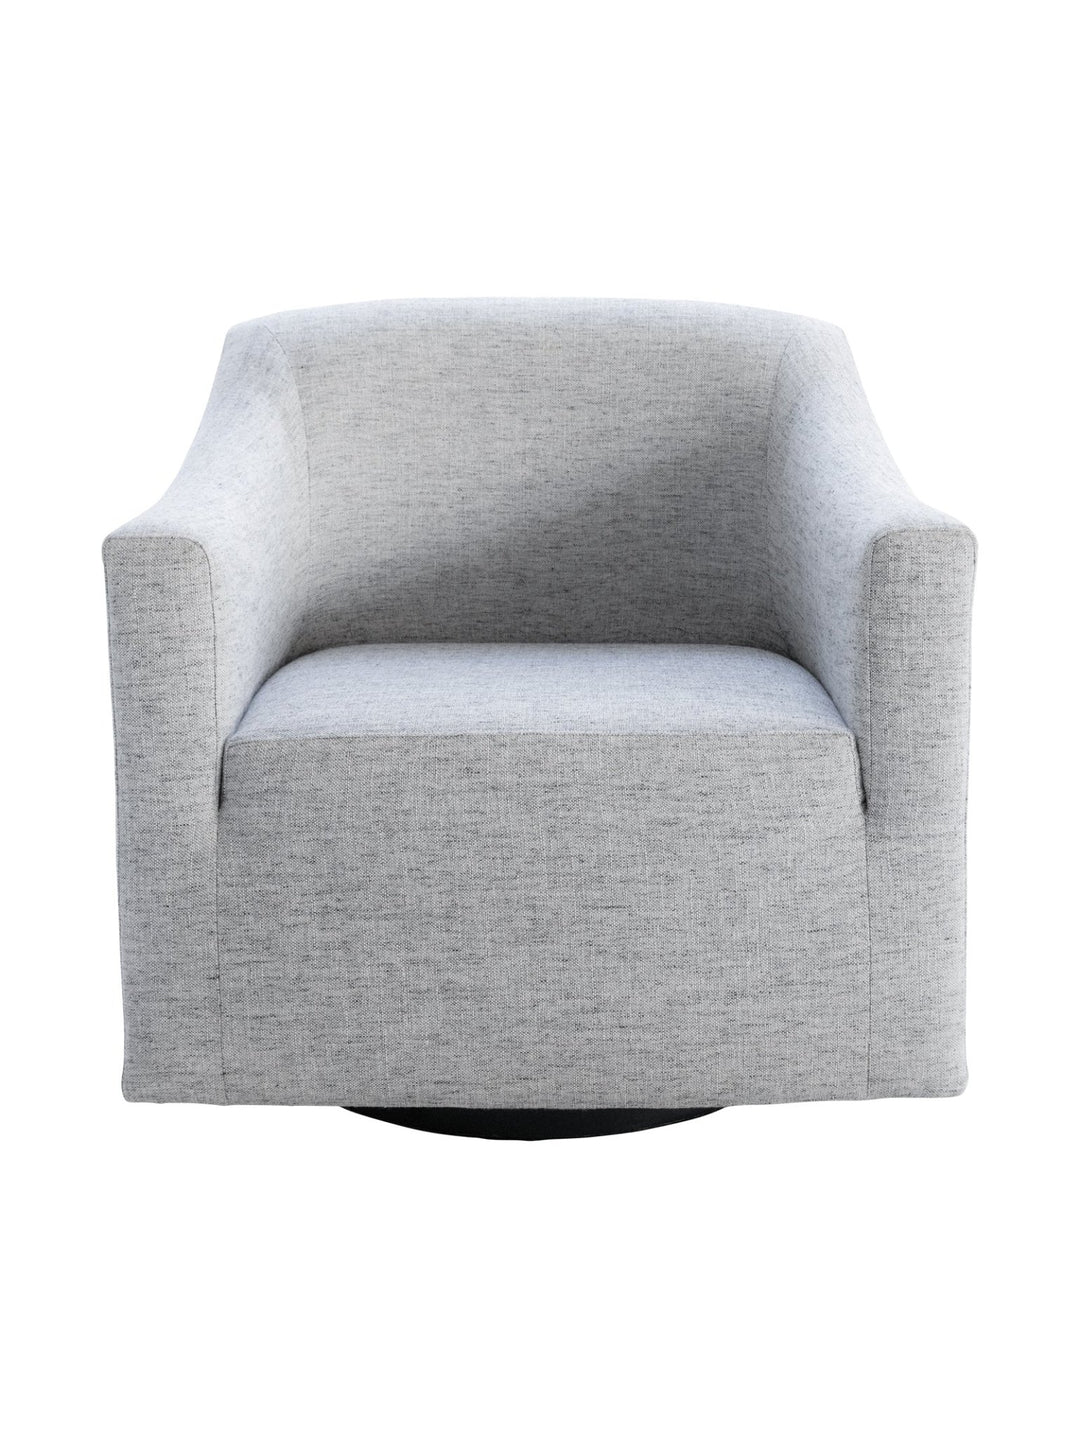 Rocco Swivel Chair in Prussian - Chair - Hertex Haus - badge_fabric